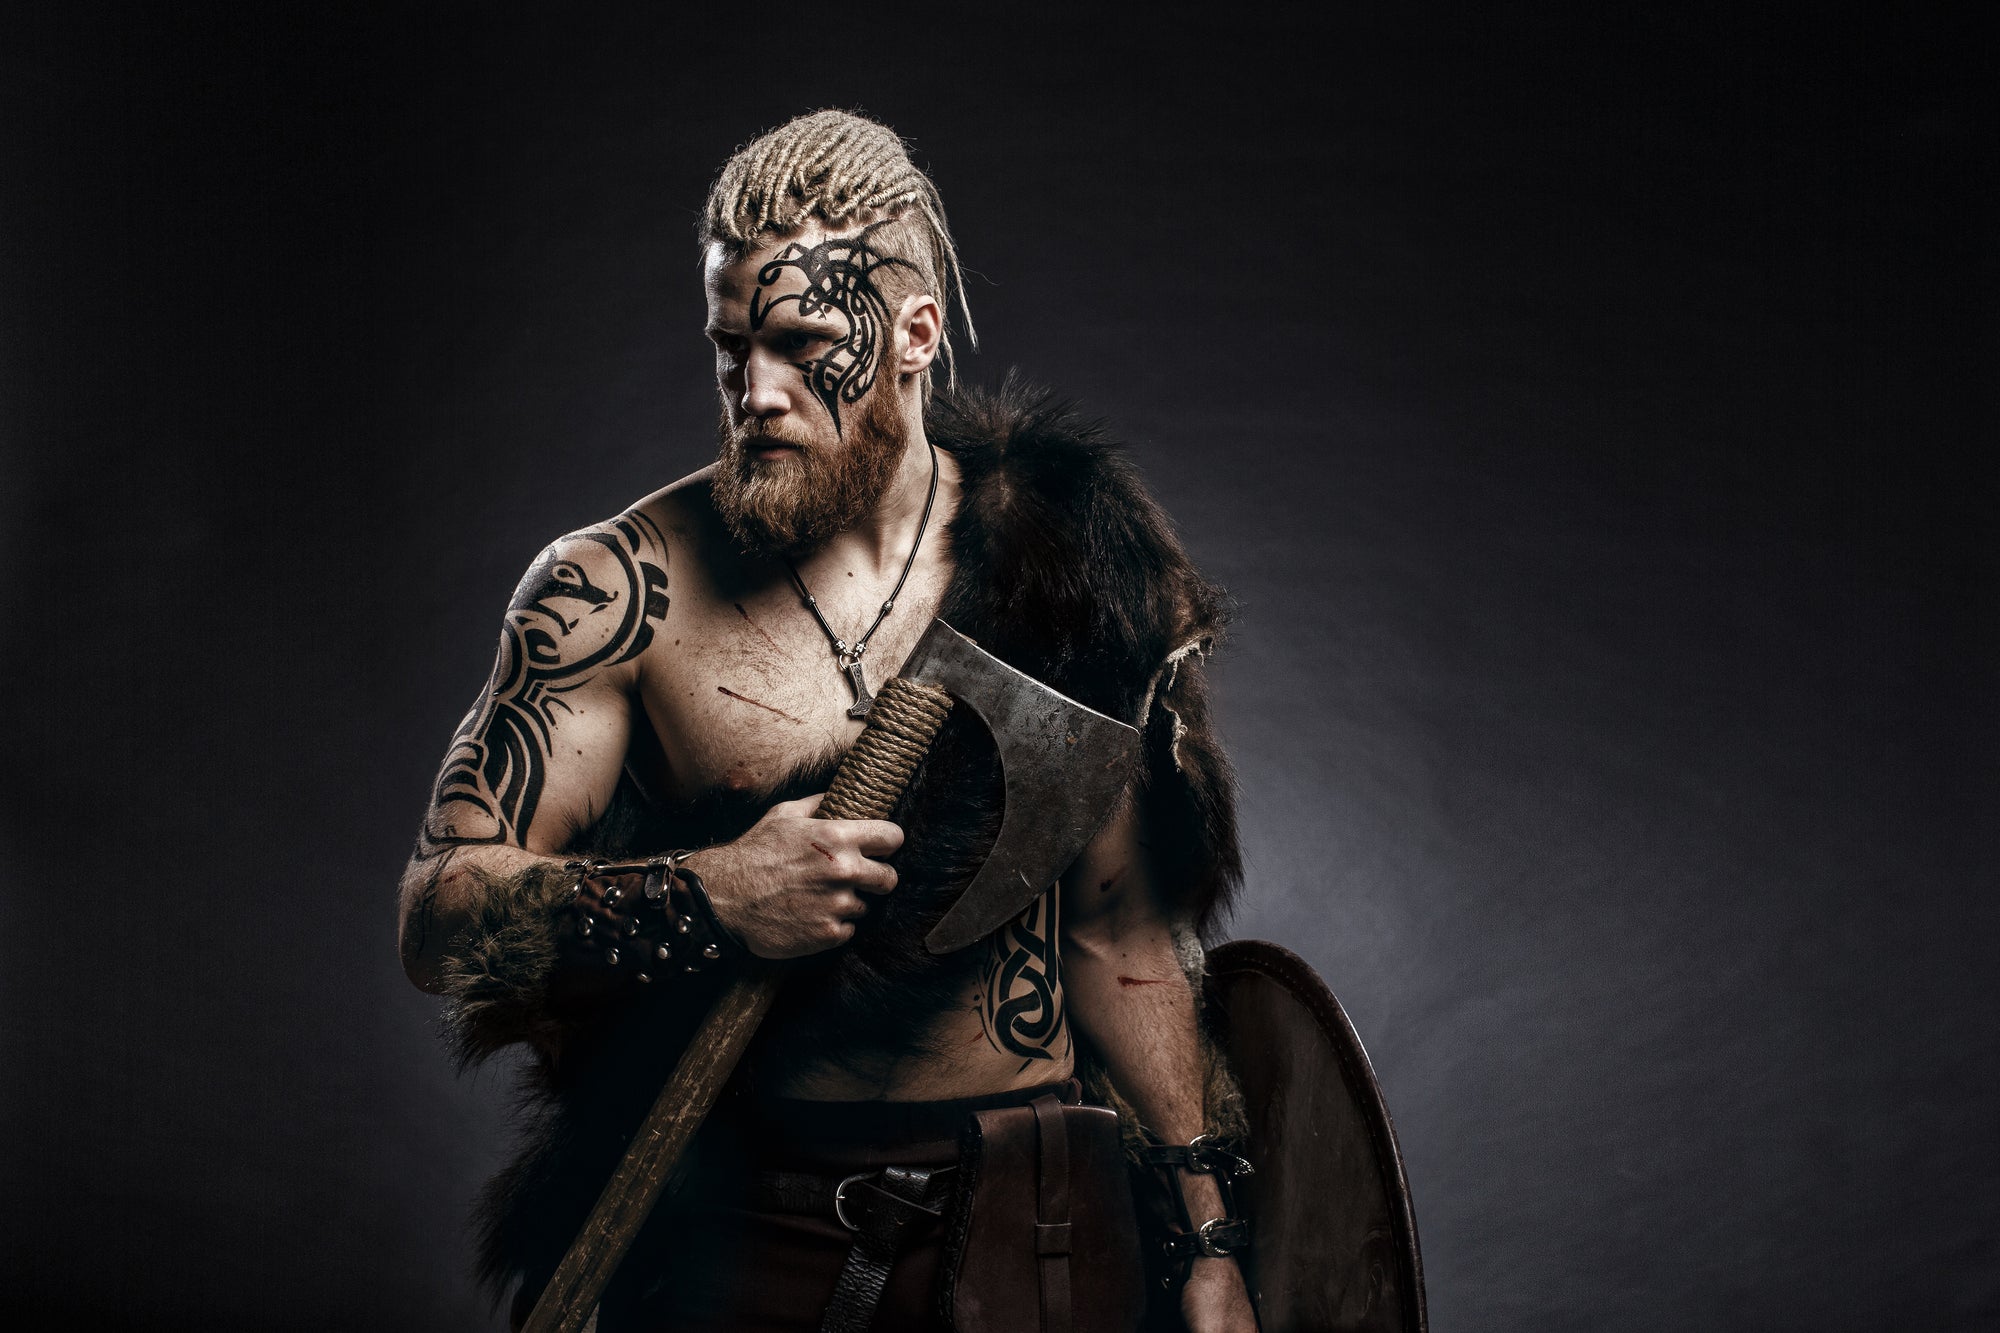 The Viking Workout for Becoming a Berserker